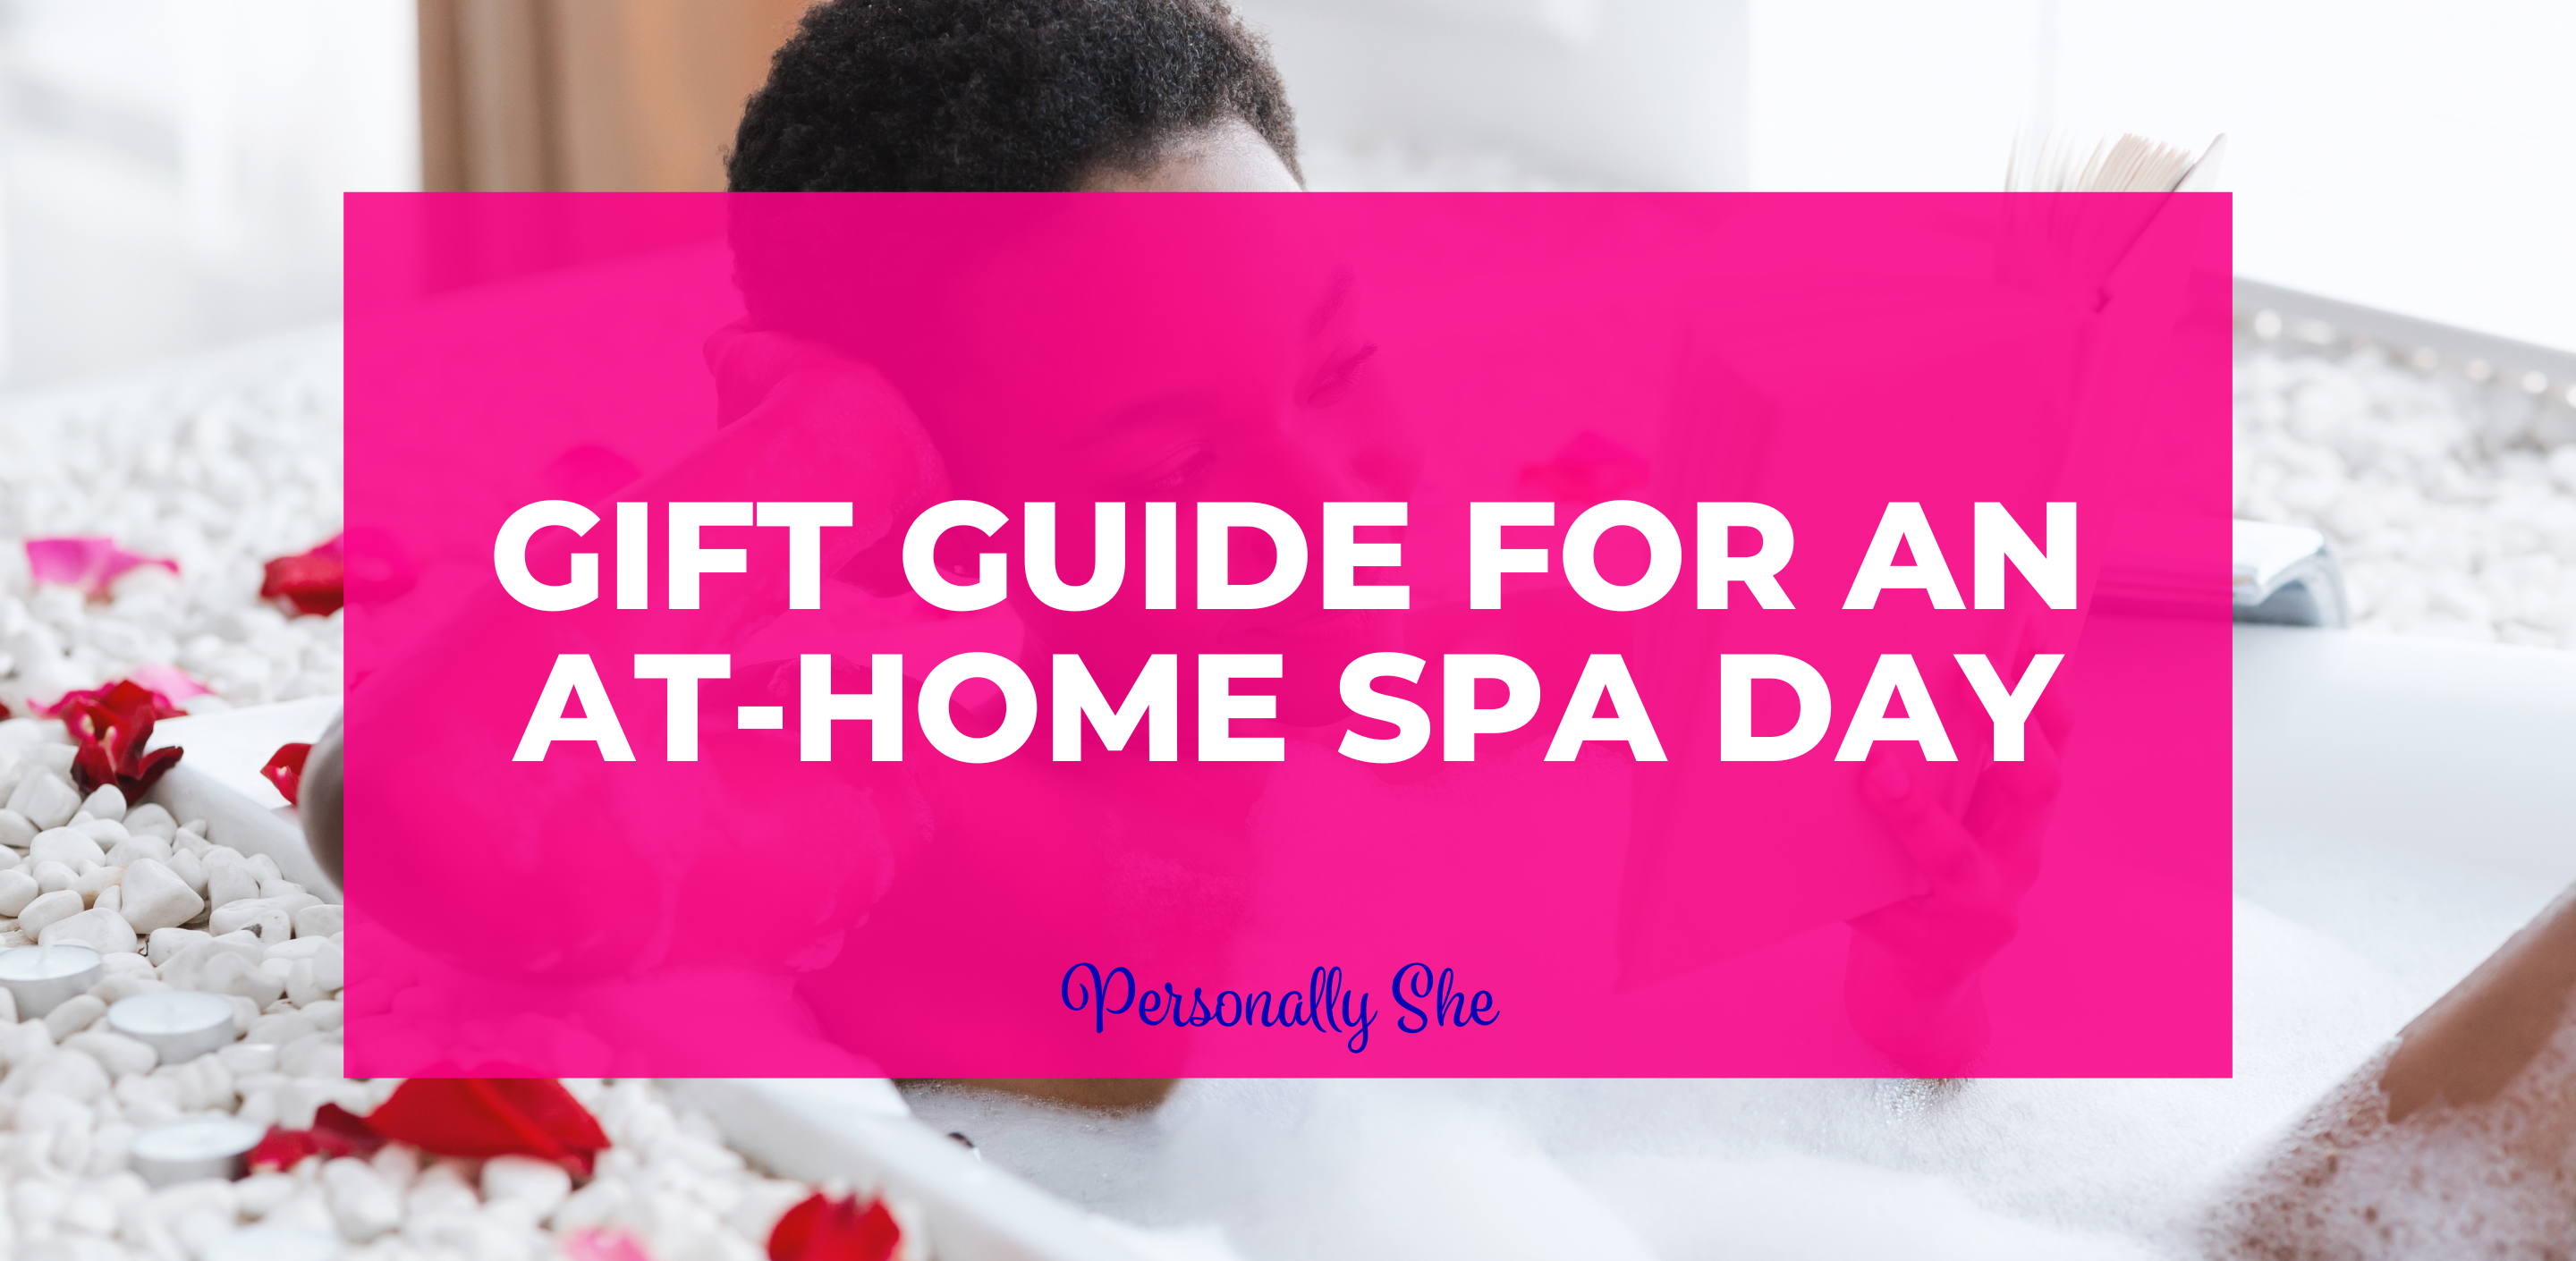 Gift Guide for an At-Home Spa Day